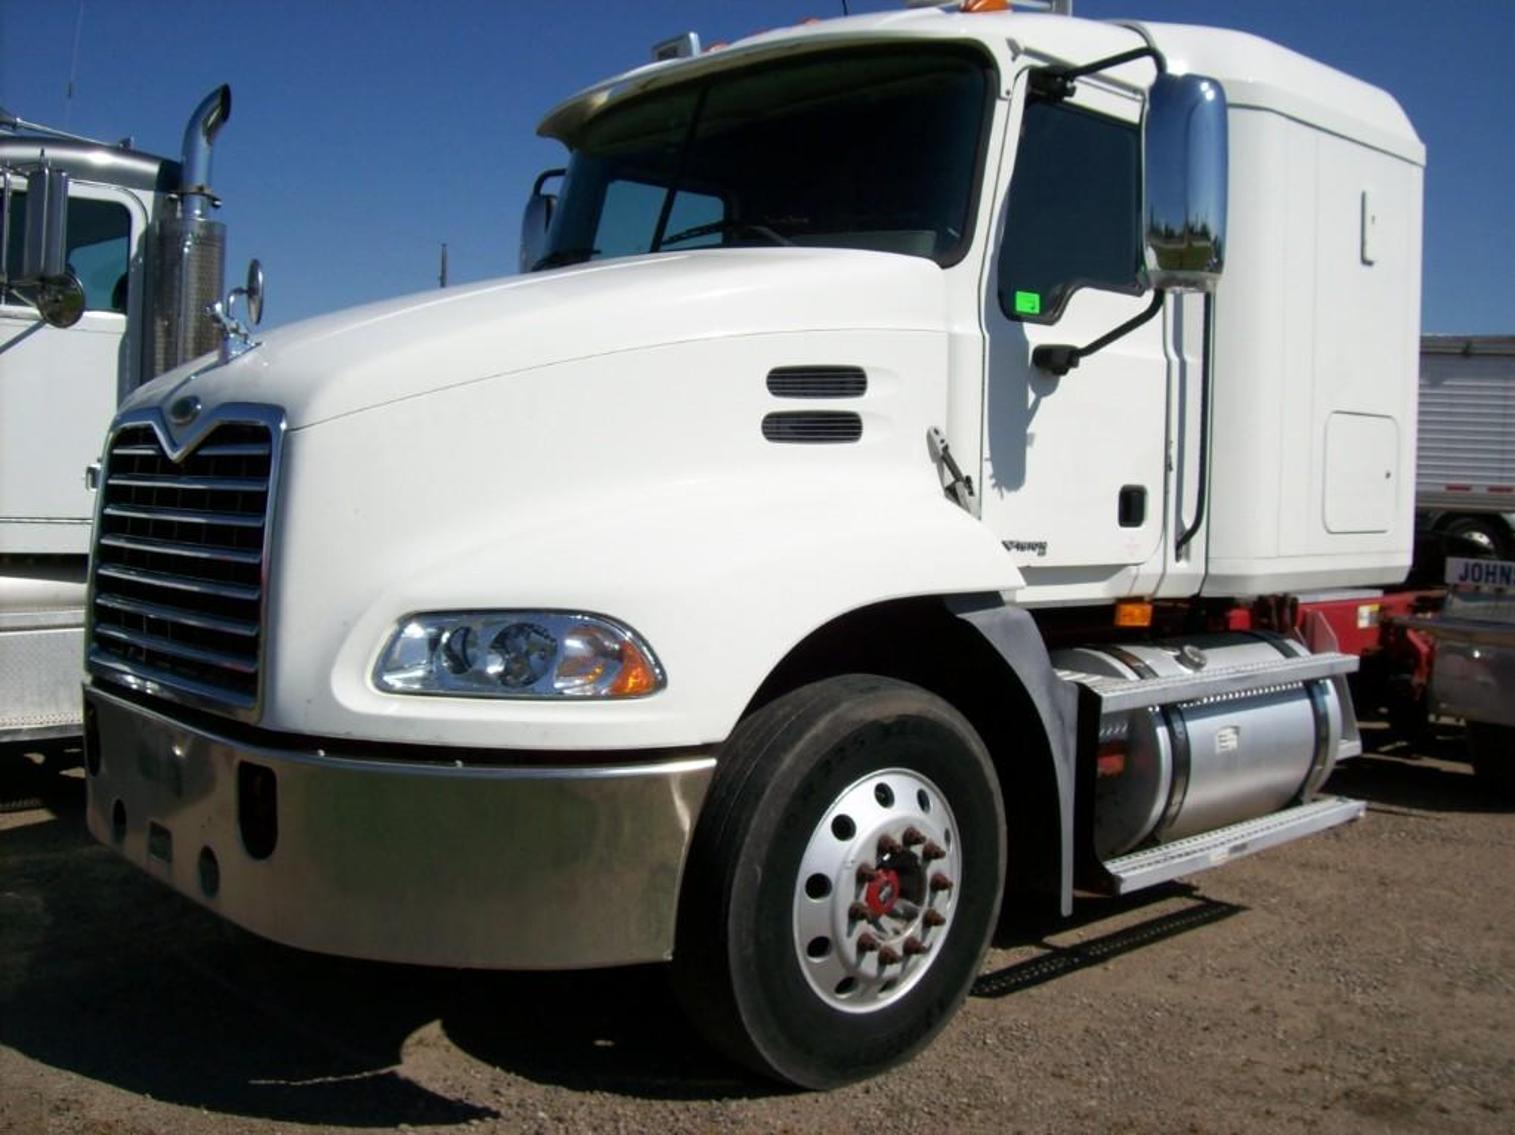 Dawson Truck Parts Excess Equipment: Trucks, Trailers, Pickups and More